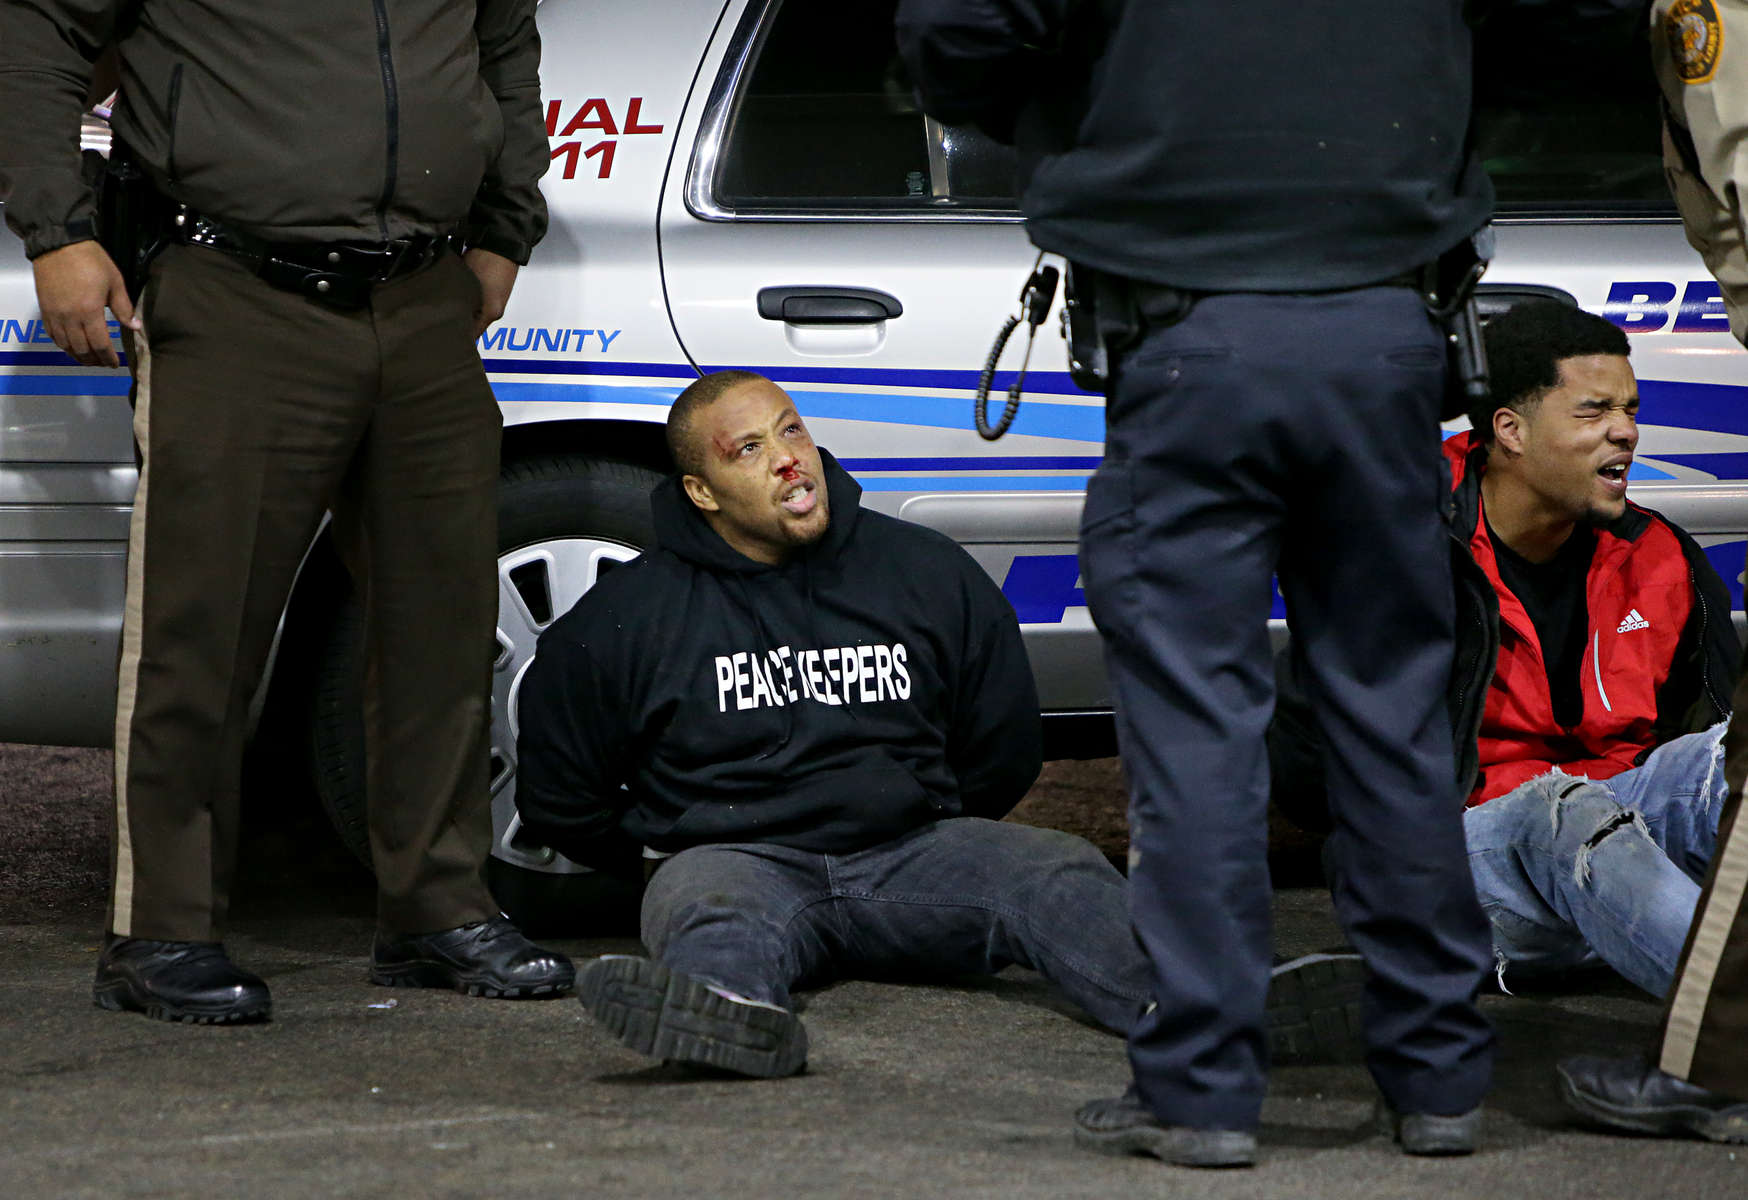 Two men arrested by police during a fight are seated next to a police cruiser on Wednesday, Dec. 24, 2014 on the lot of a gas station where teenager was fatally shot late Tuesday Dec. 23, 2014 at a Mobil gas station on North Hanley Road in Berkeley. The fight broke out after the body of the teen was removed and police and protesters got into a shoving match.Photo By David Carson, dcarson@post-dispatch.com